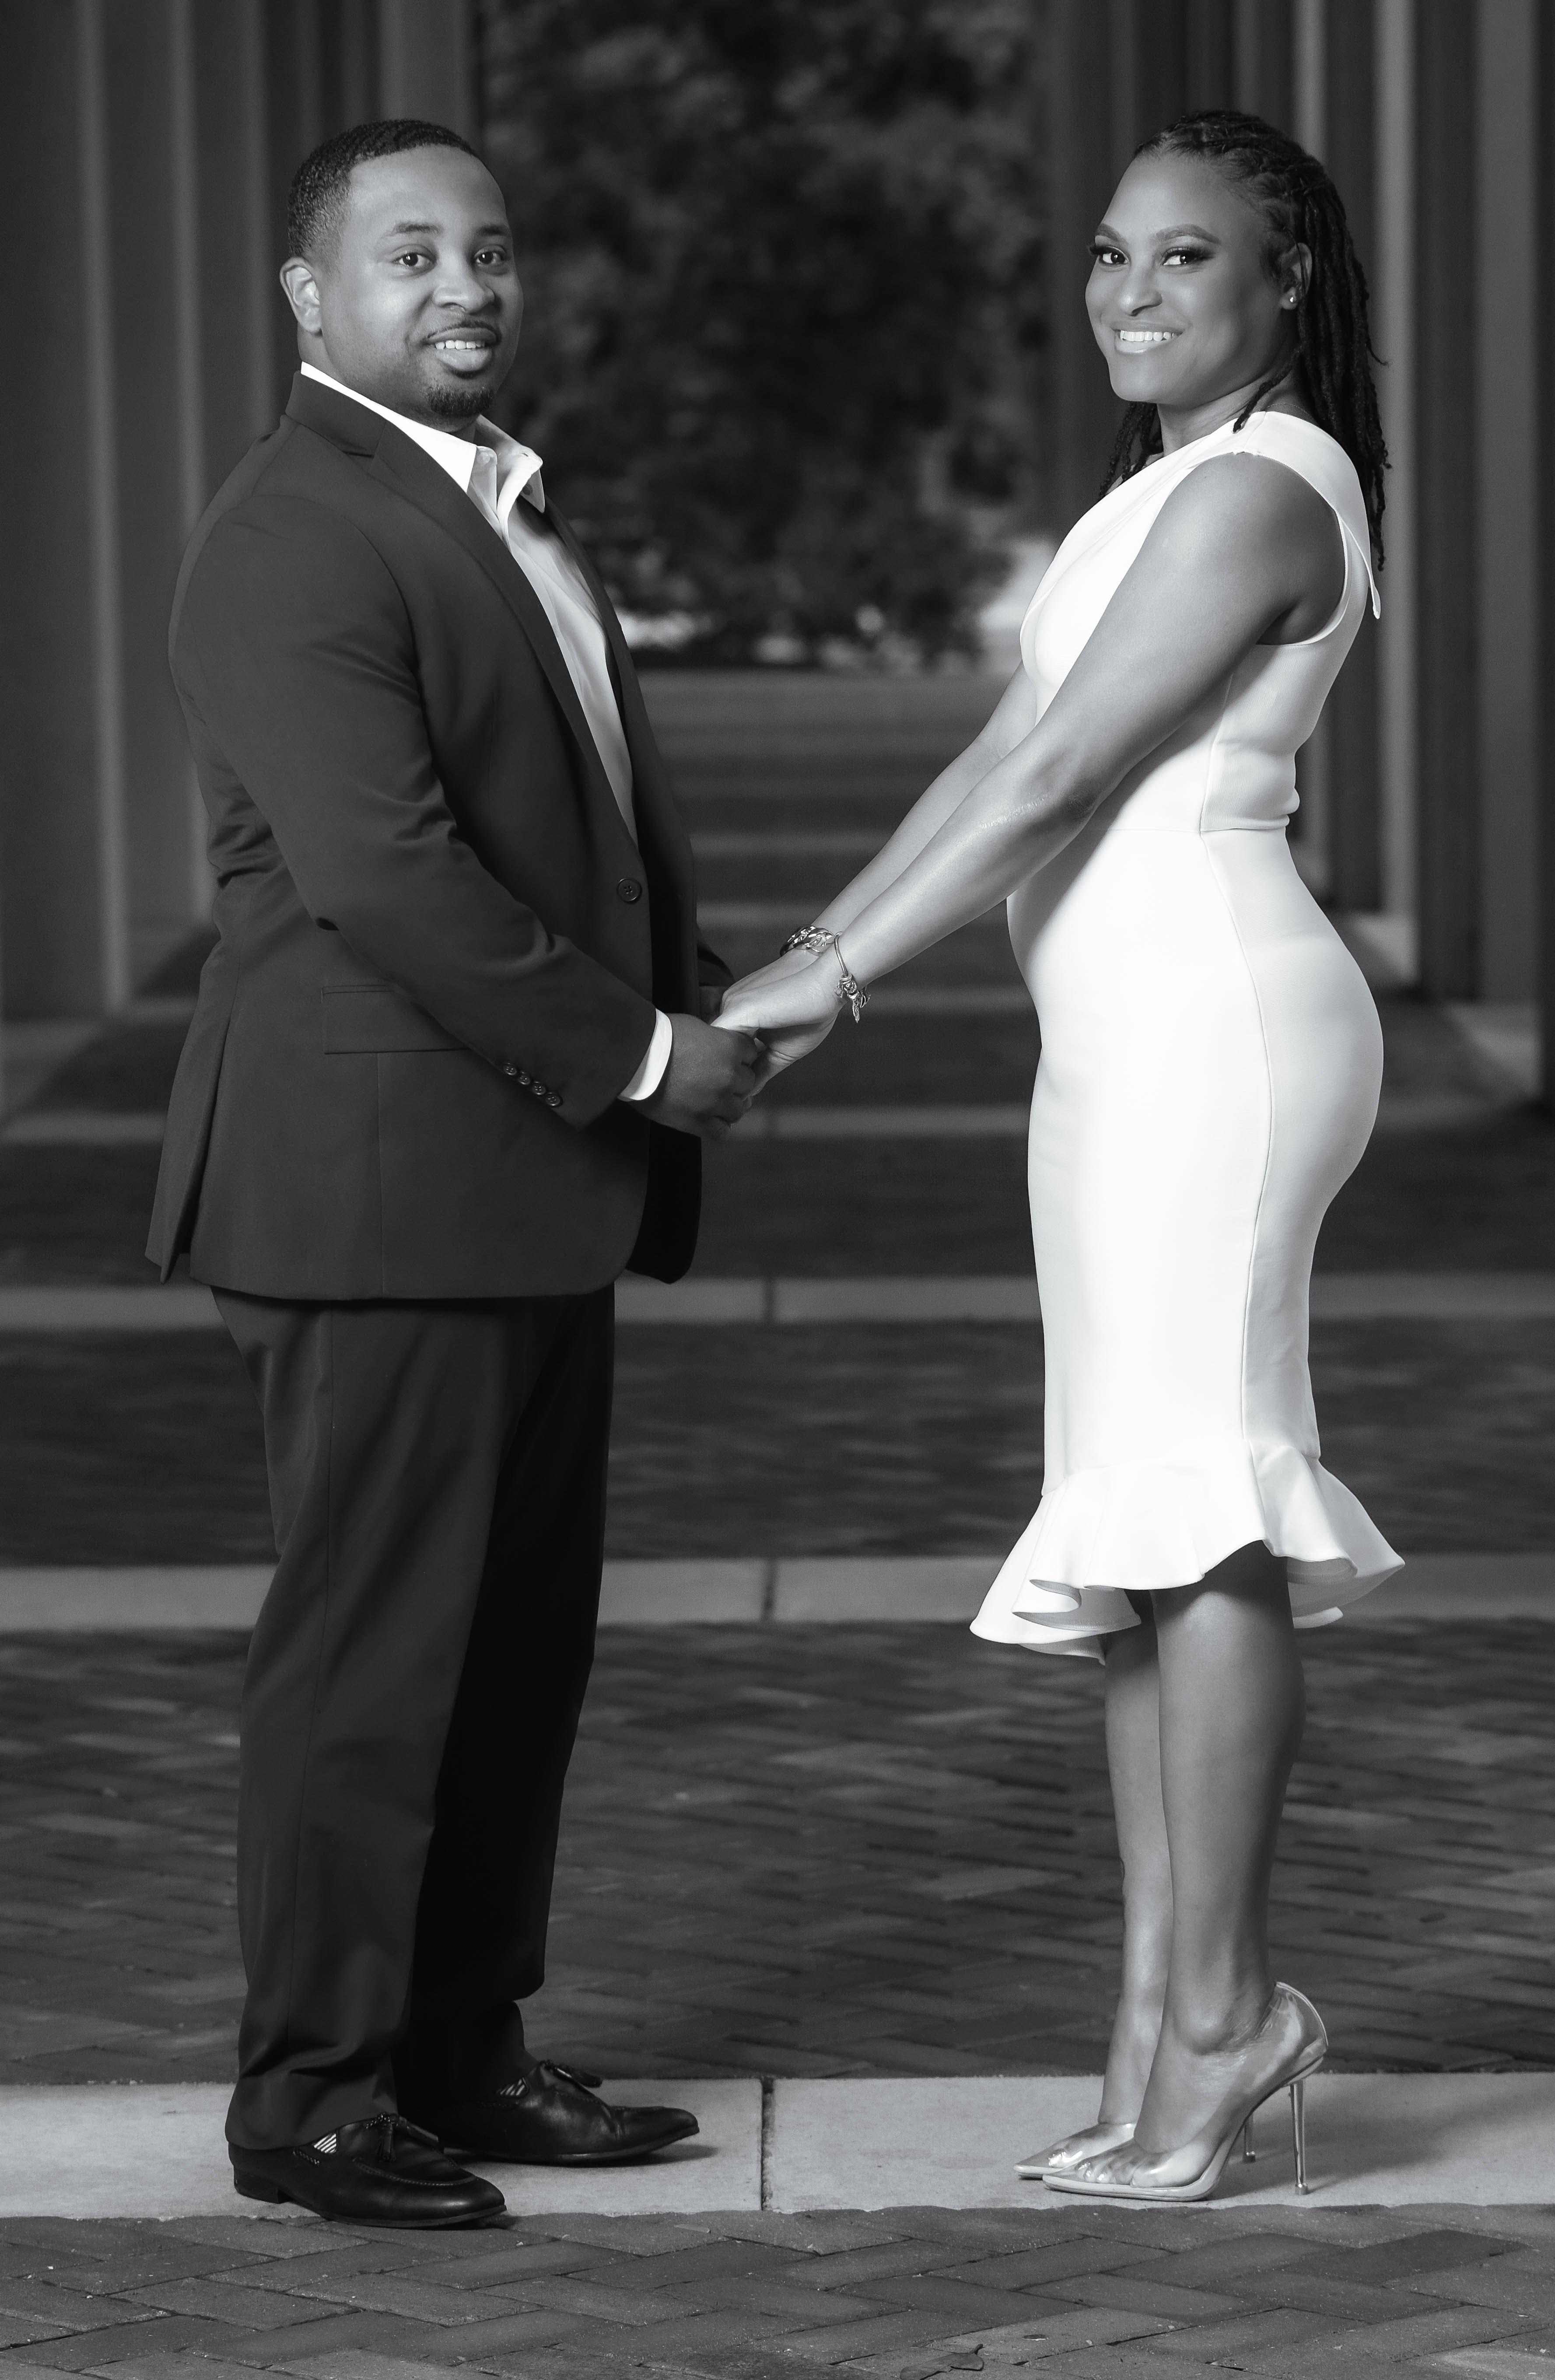 The Wedding Website of Darylana Antoinette Cain and C.Travis Johnson